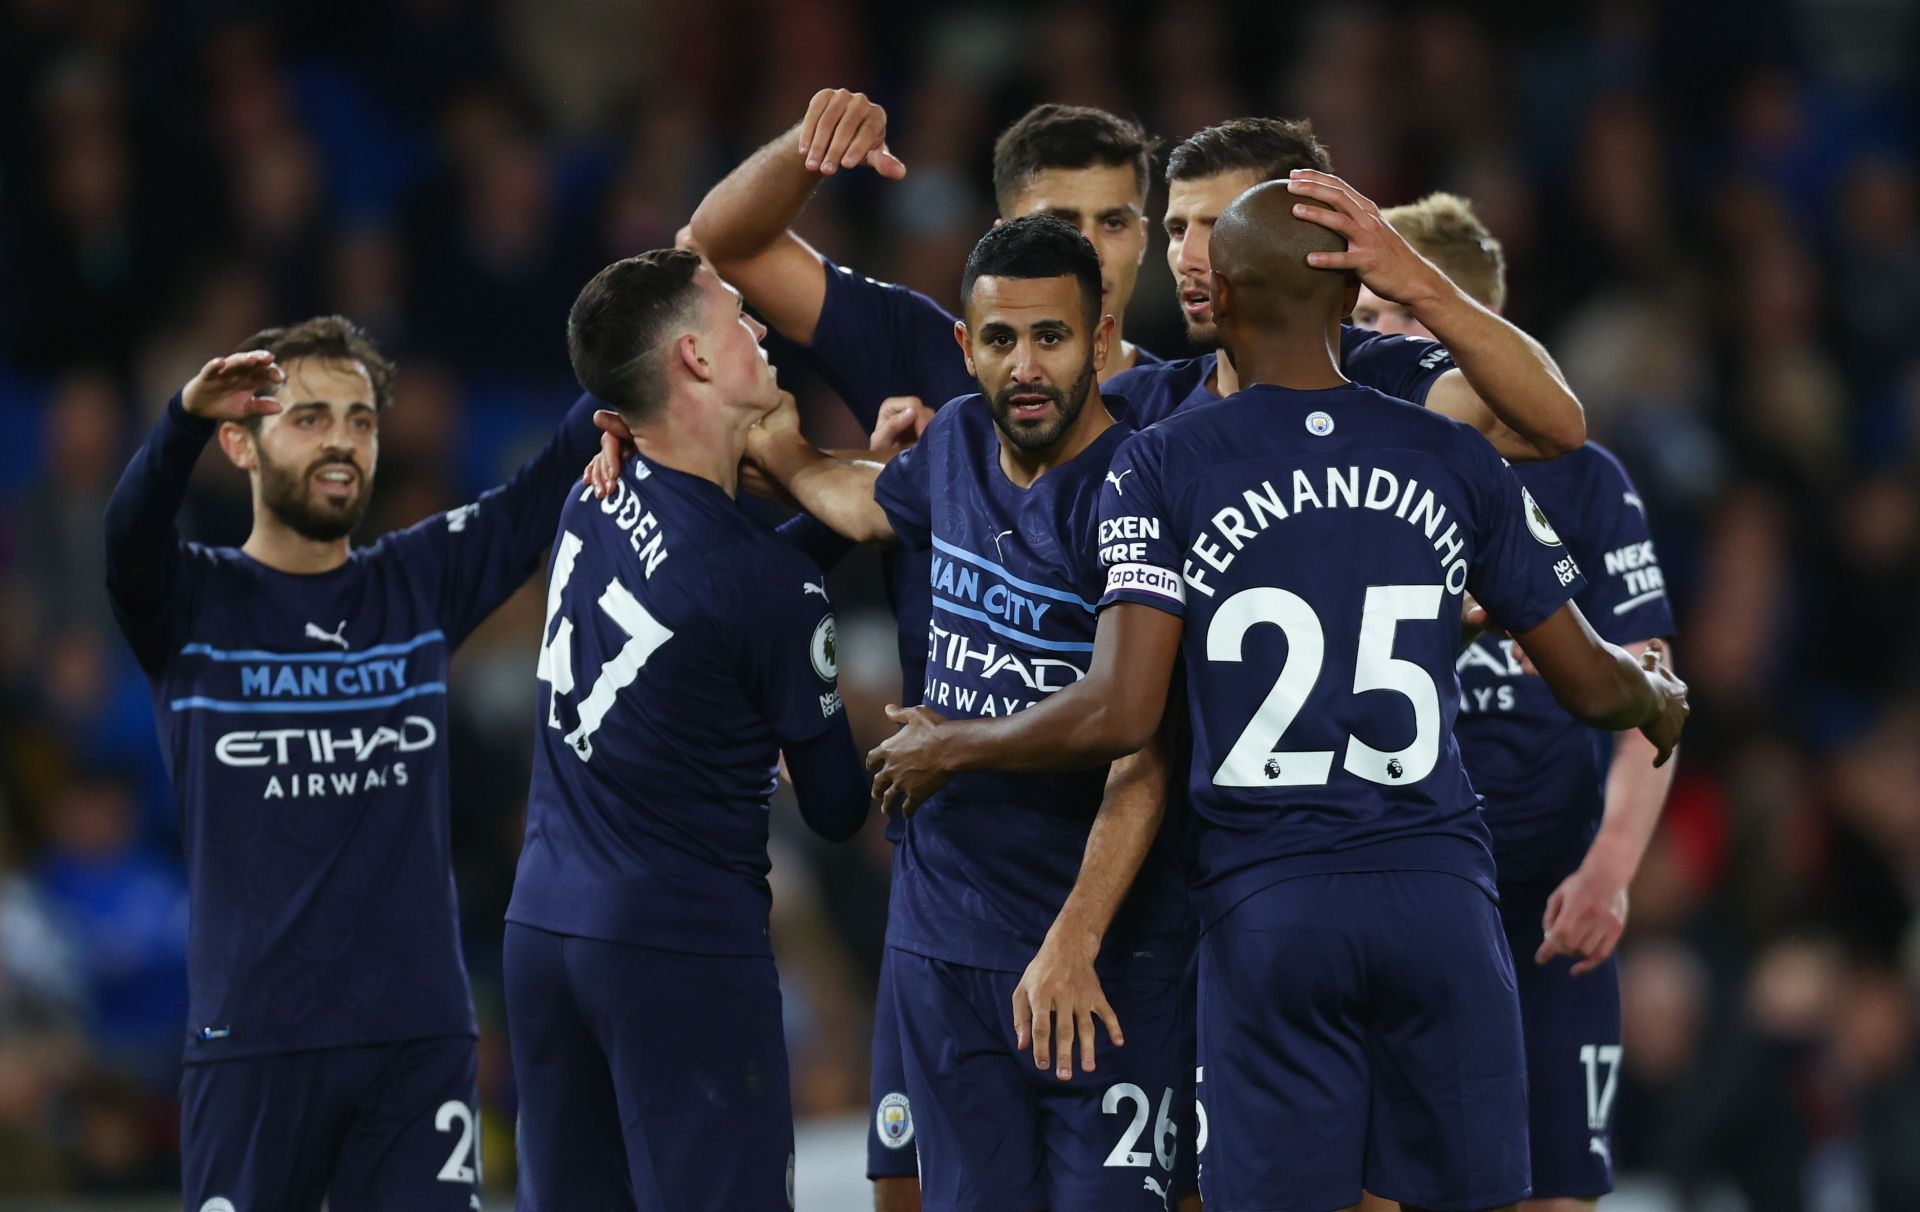 Manchester City sailed to a comfortable 4-1 win over Brighton &amp; Hove Albion.